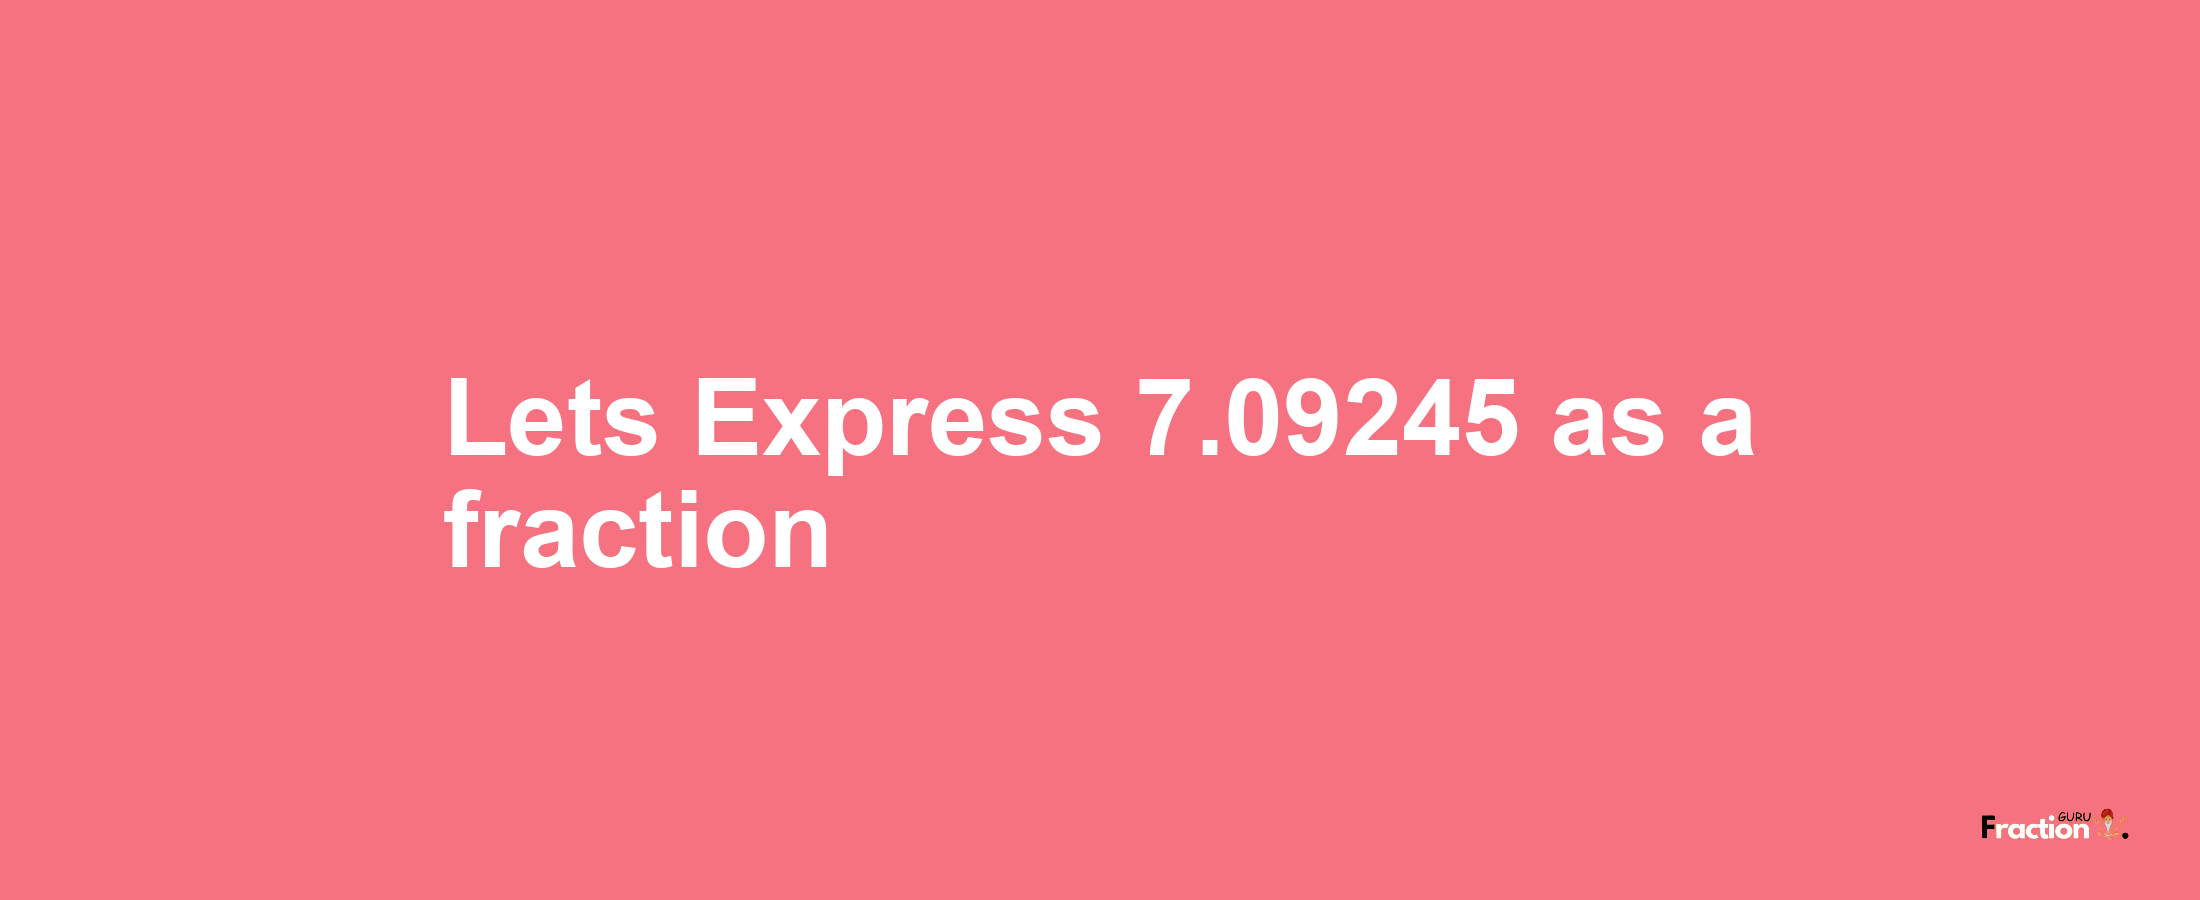 Lets Express 7.09245 as afraction